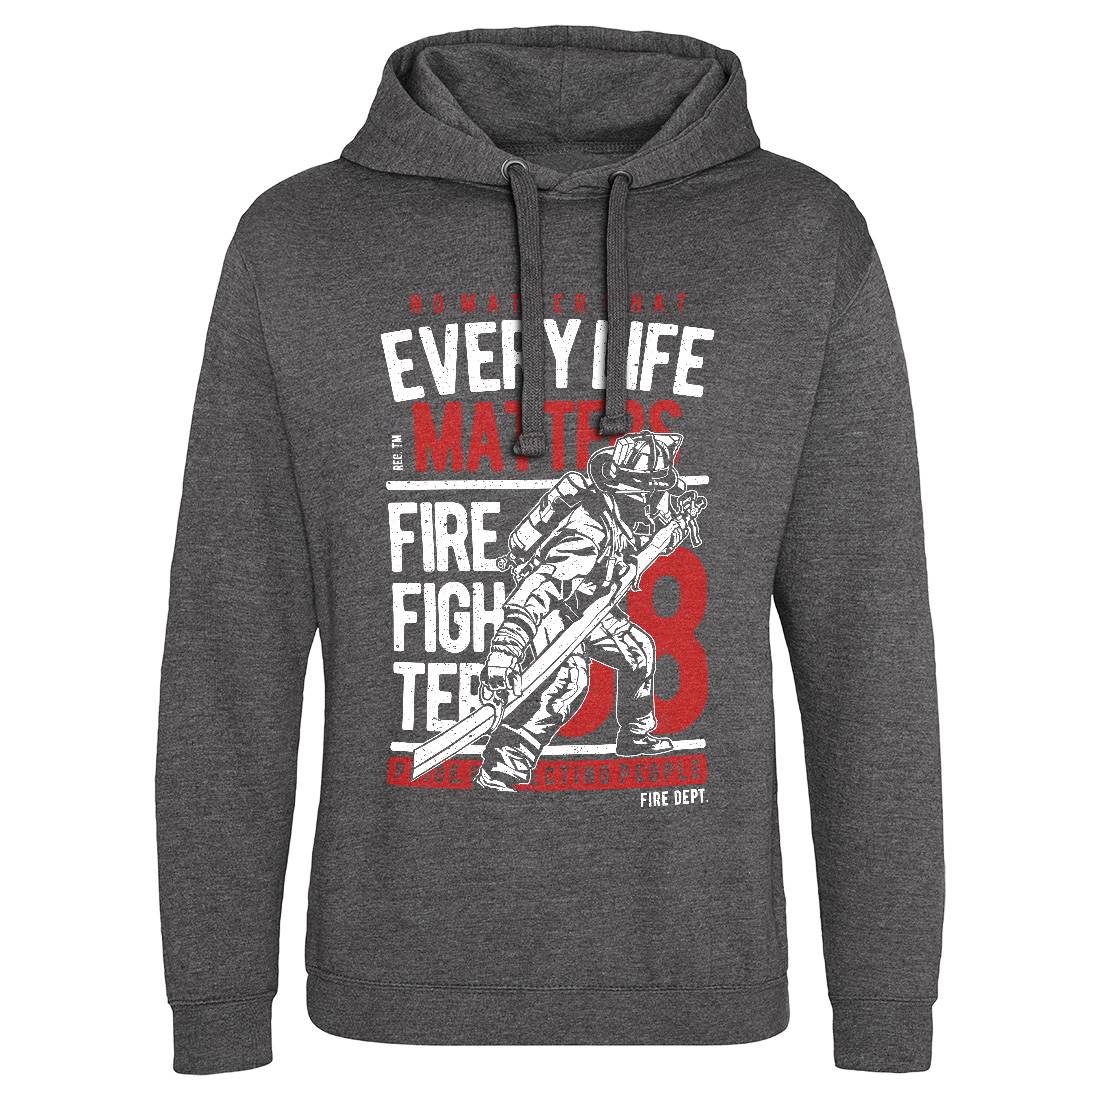 Every Life Matters Mens Hoodie Without Pocket Firefighters A650